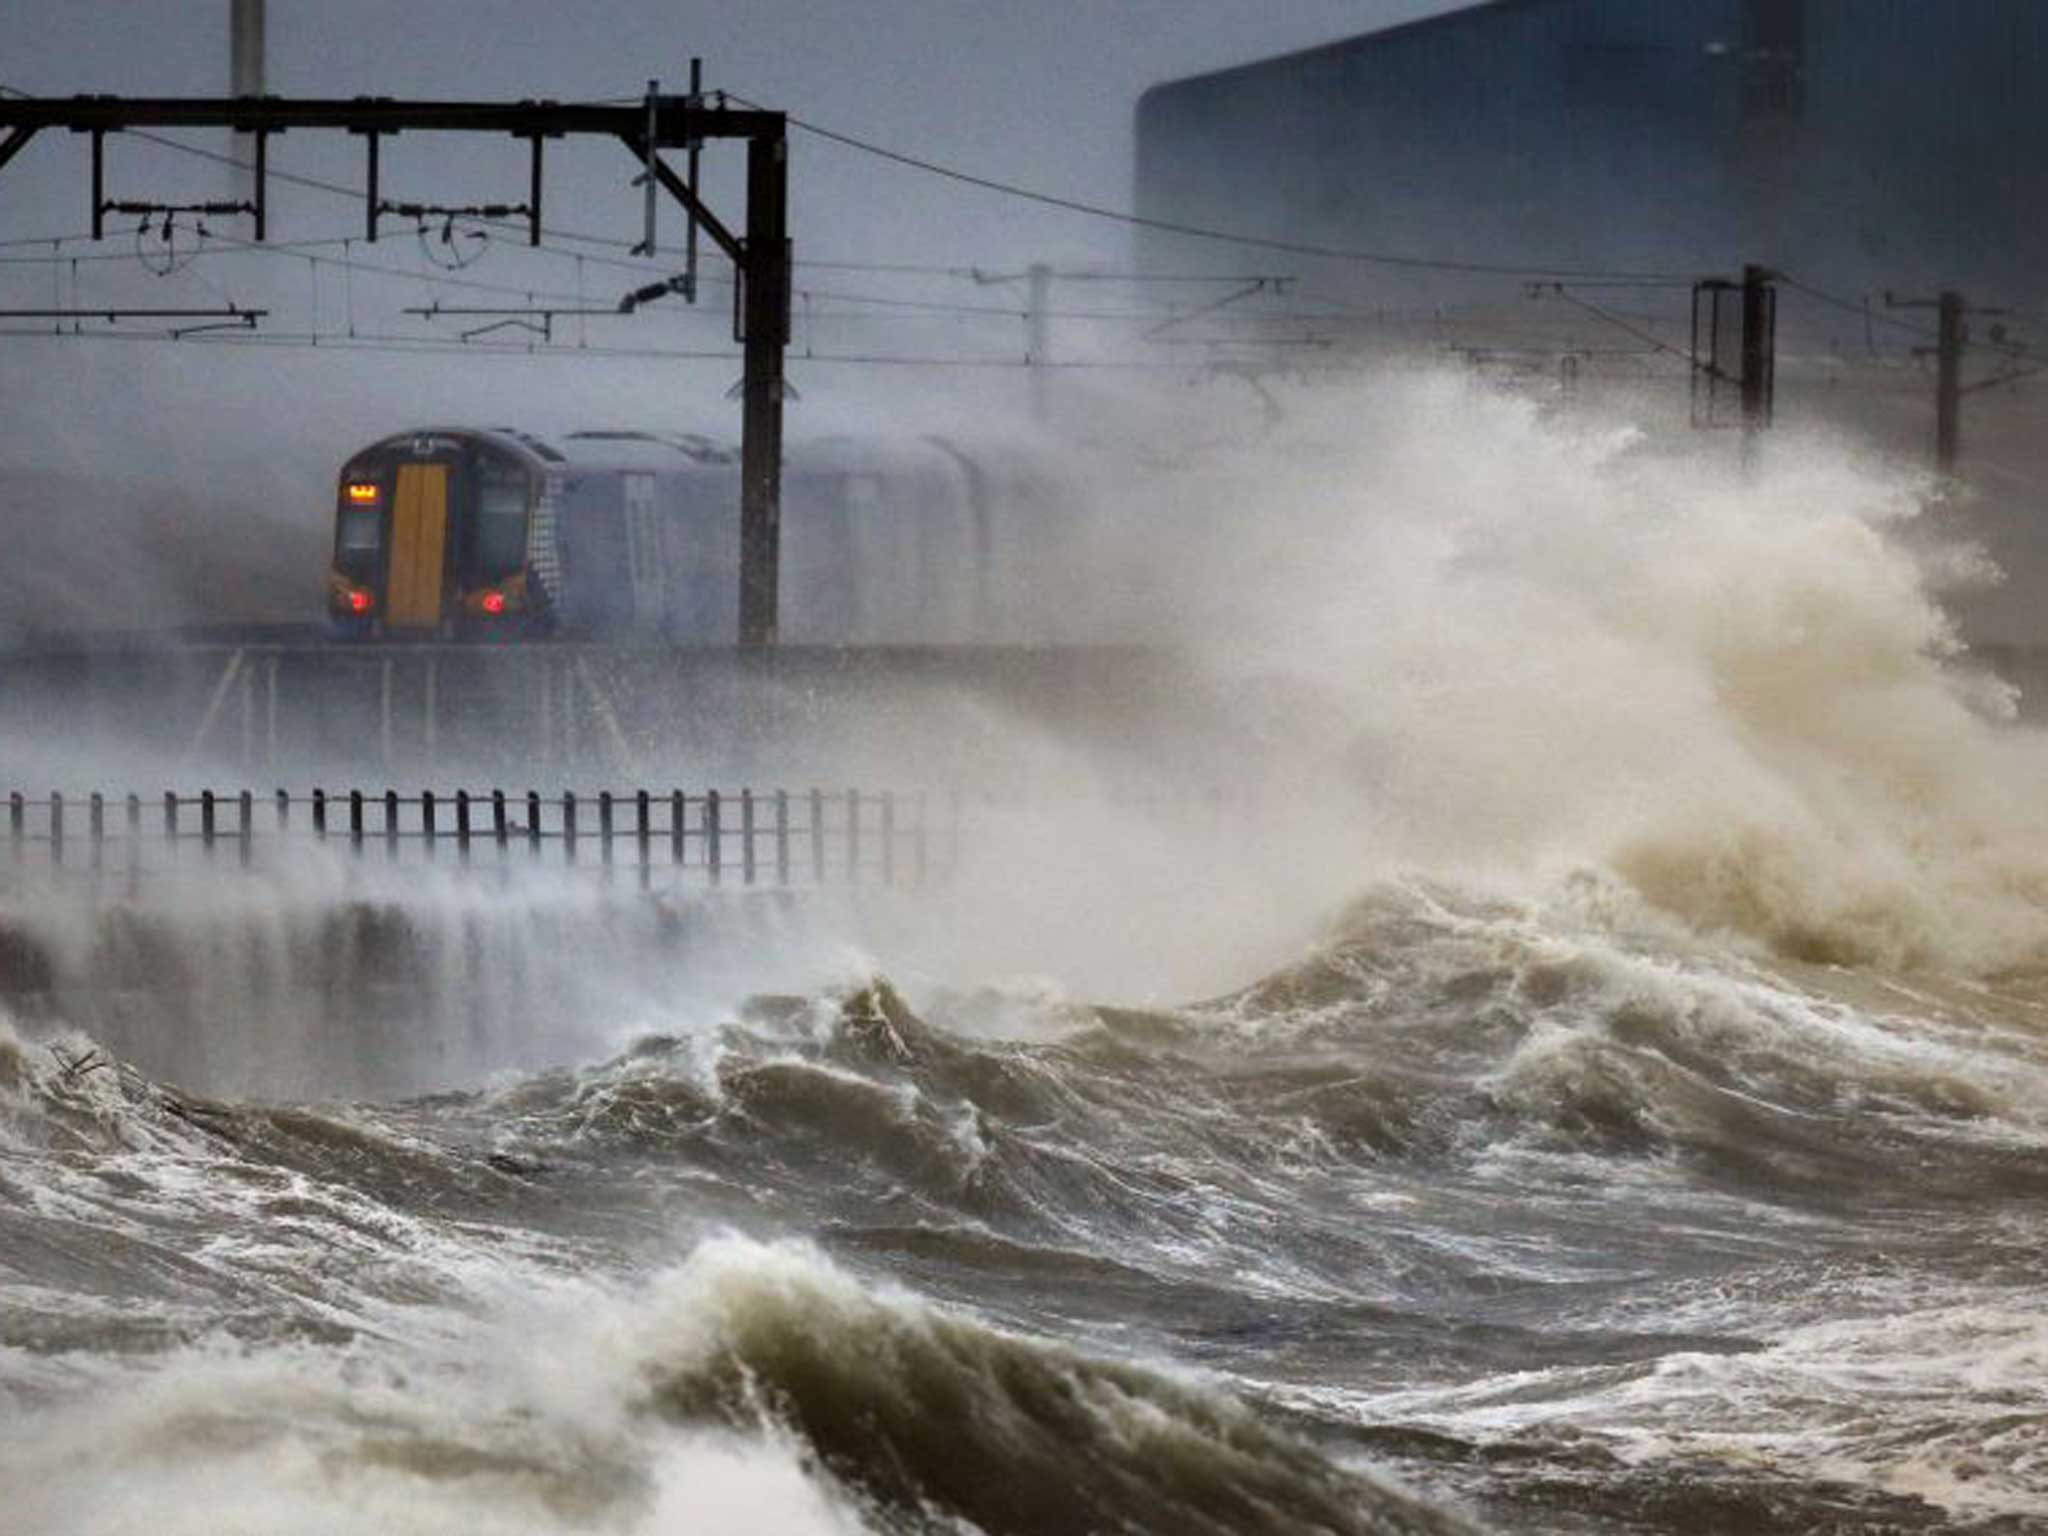 A train passes along the coast at Saltcoats in Scotland, as a combination of high tides, heavy rains and strong winds are expected to bring yet more severe flooding to many parts of the country